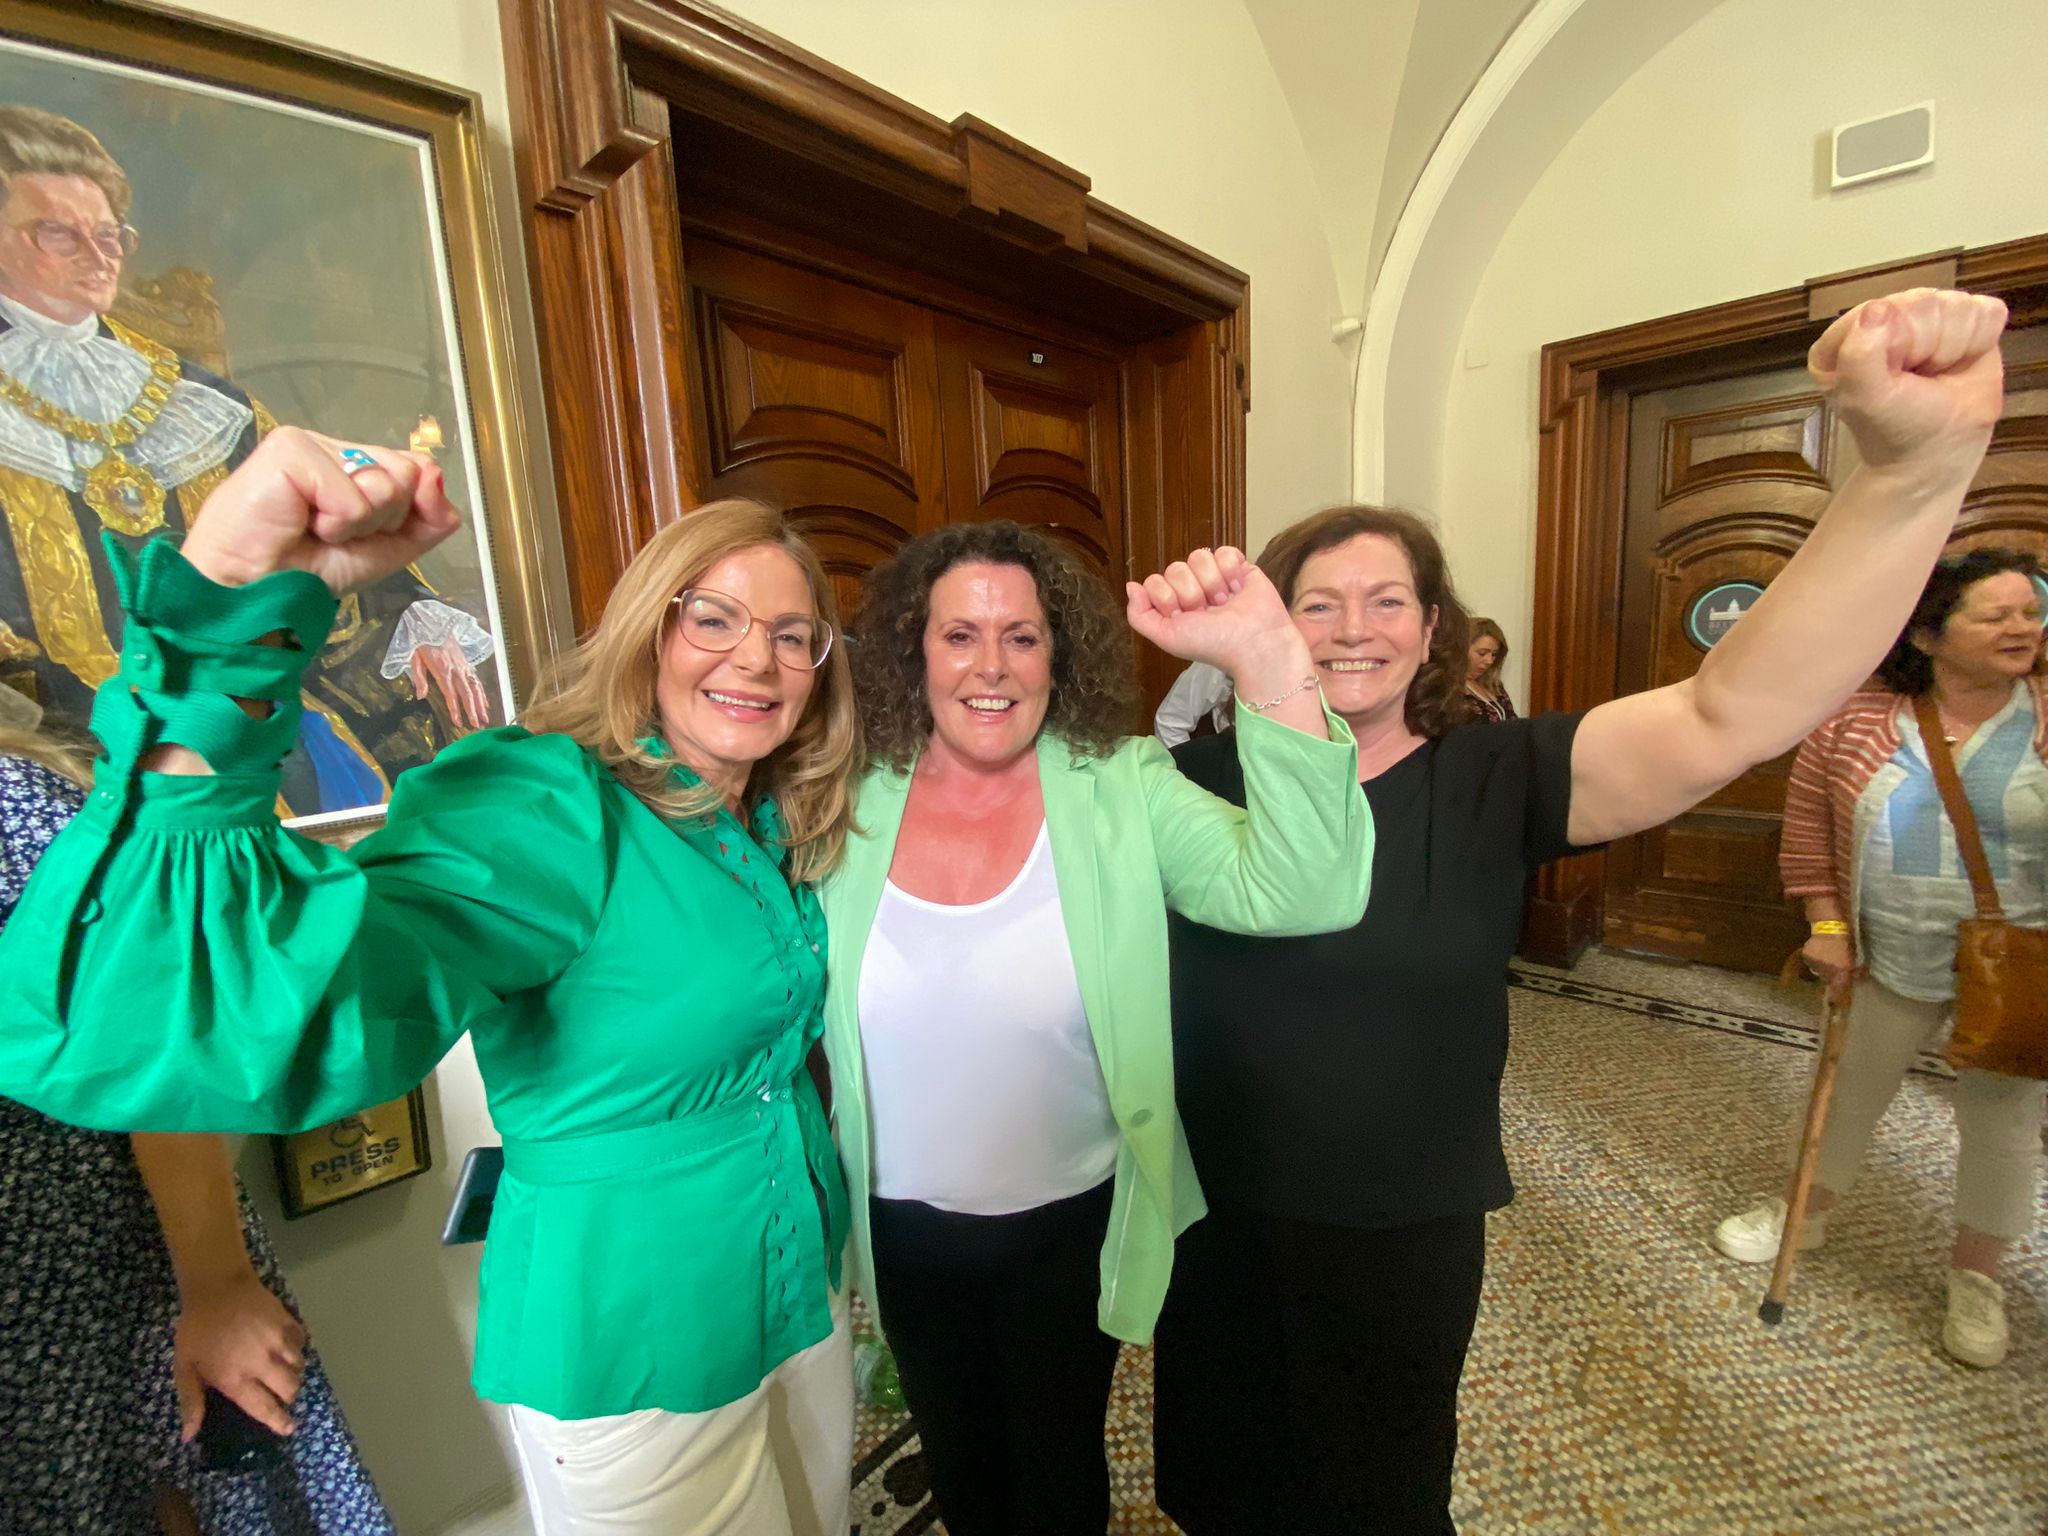 CELEBRATING: Tina Black, Bronagh Anglin and Geraldine McAteer were all elected to Belfast City Council on Friday for Sinn Féin 